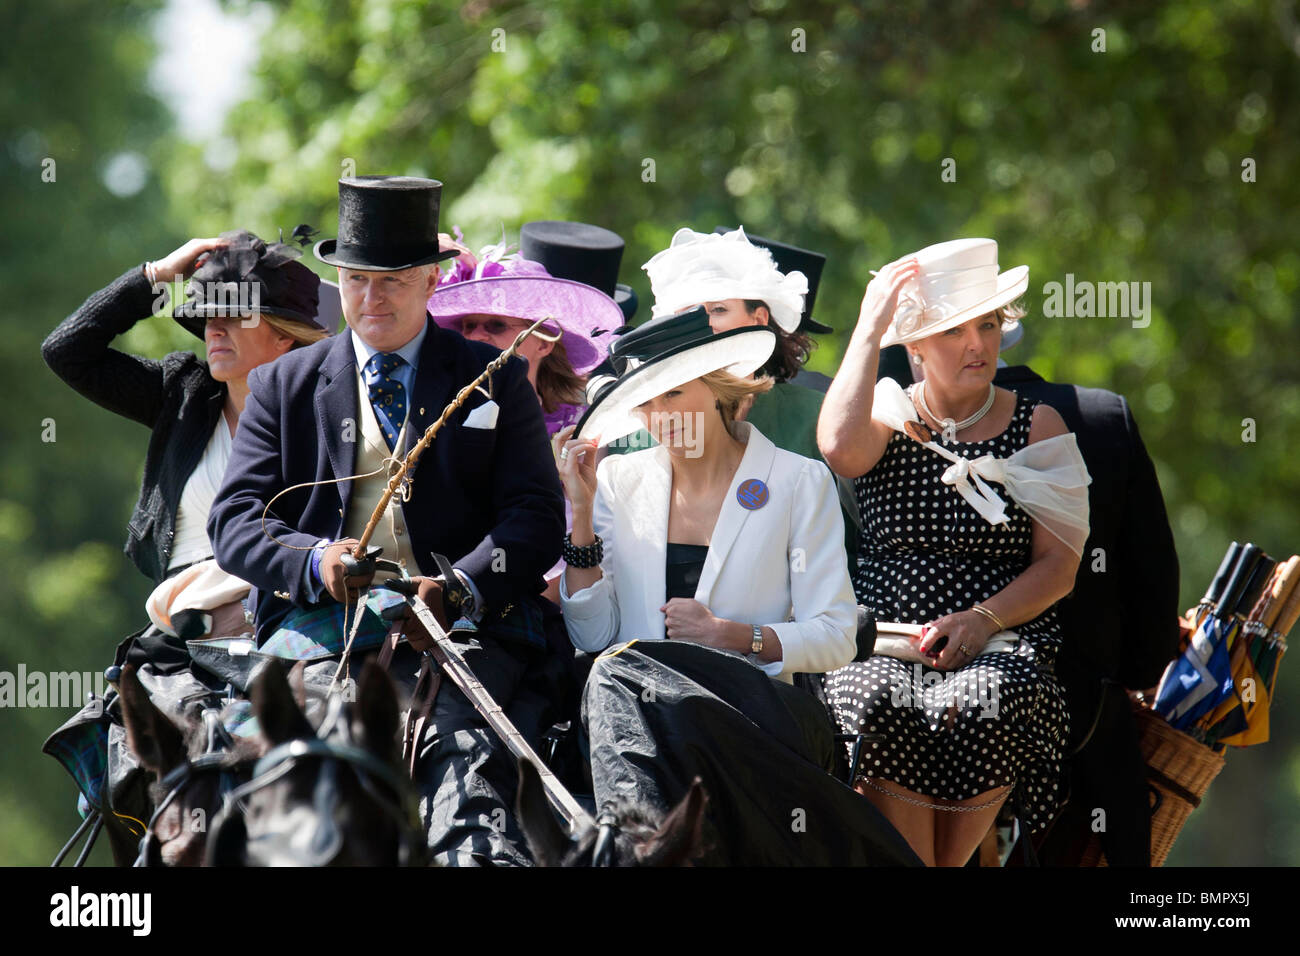 Race goers arrive by horse drawn carriage to the Royal Ascot race meeting wearing hats Stock Photo